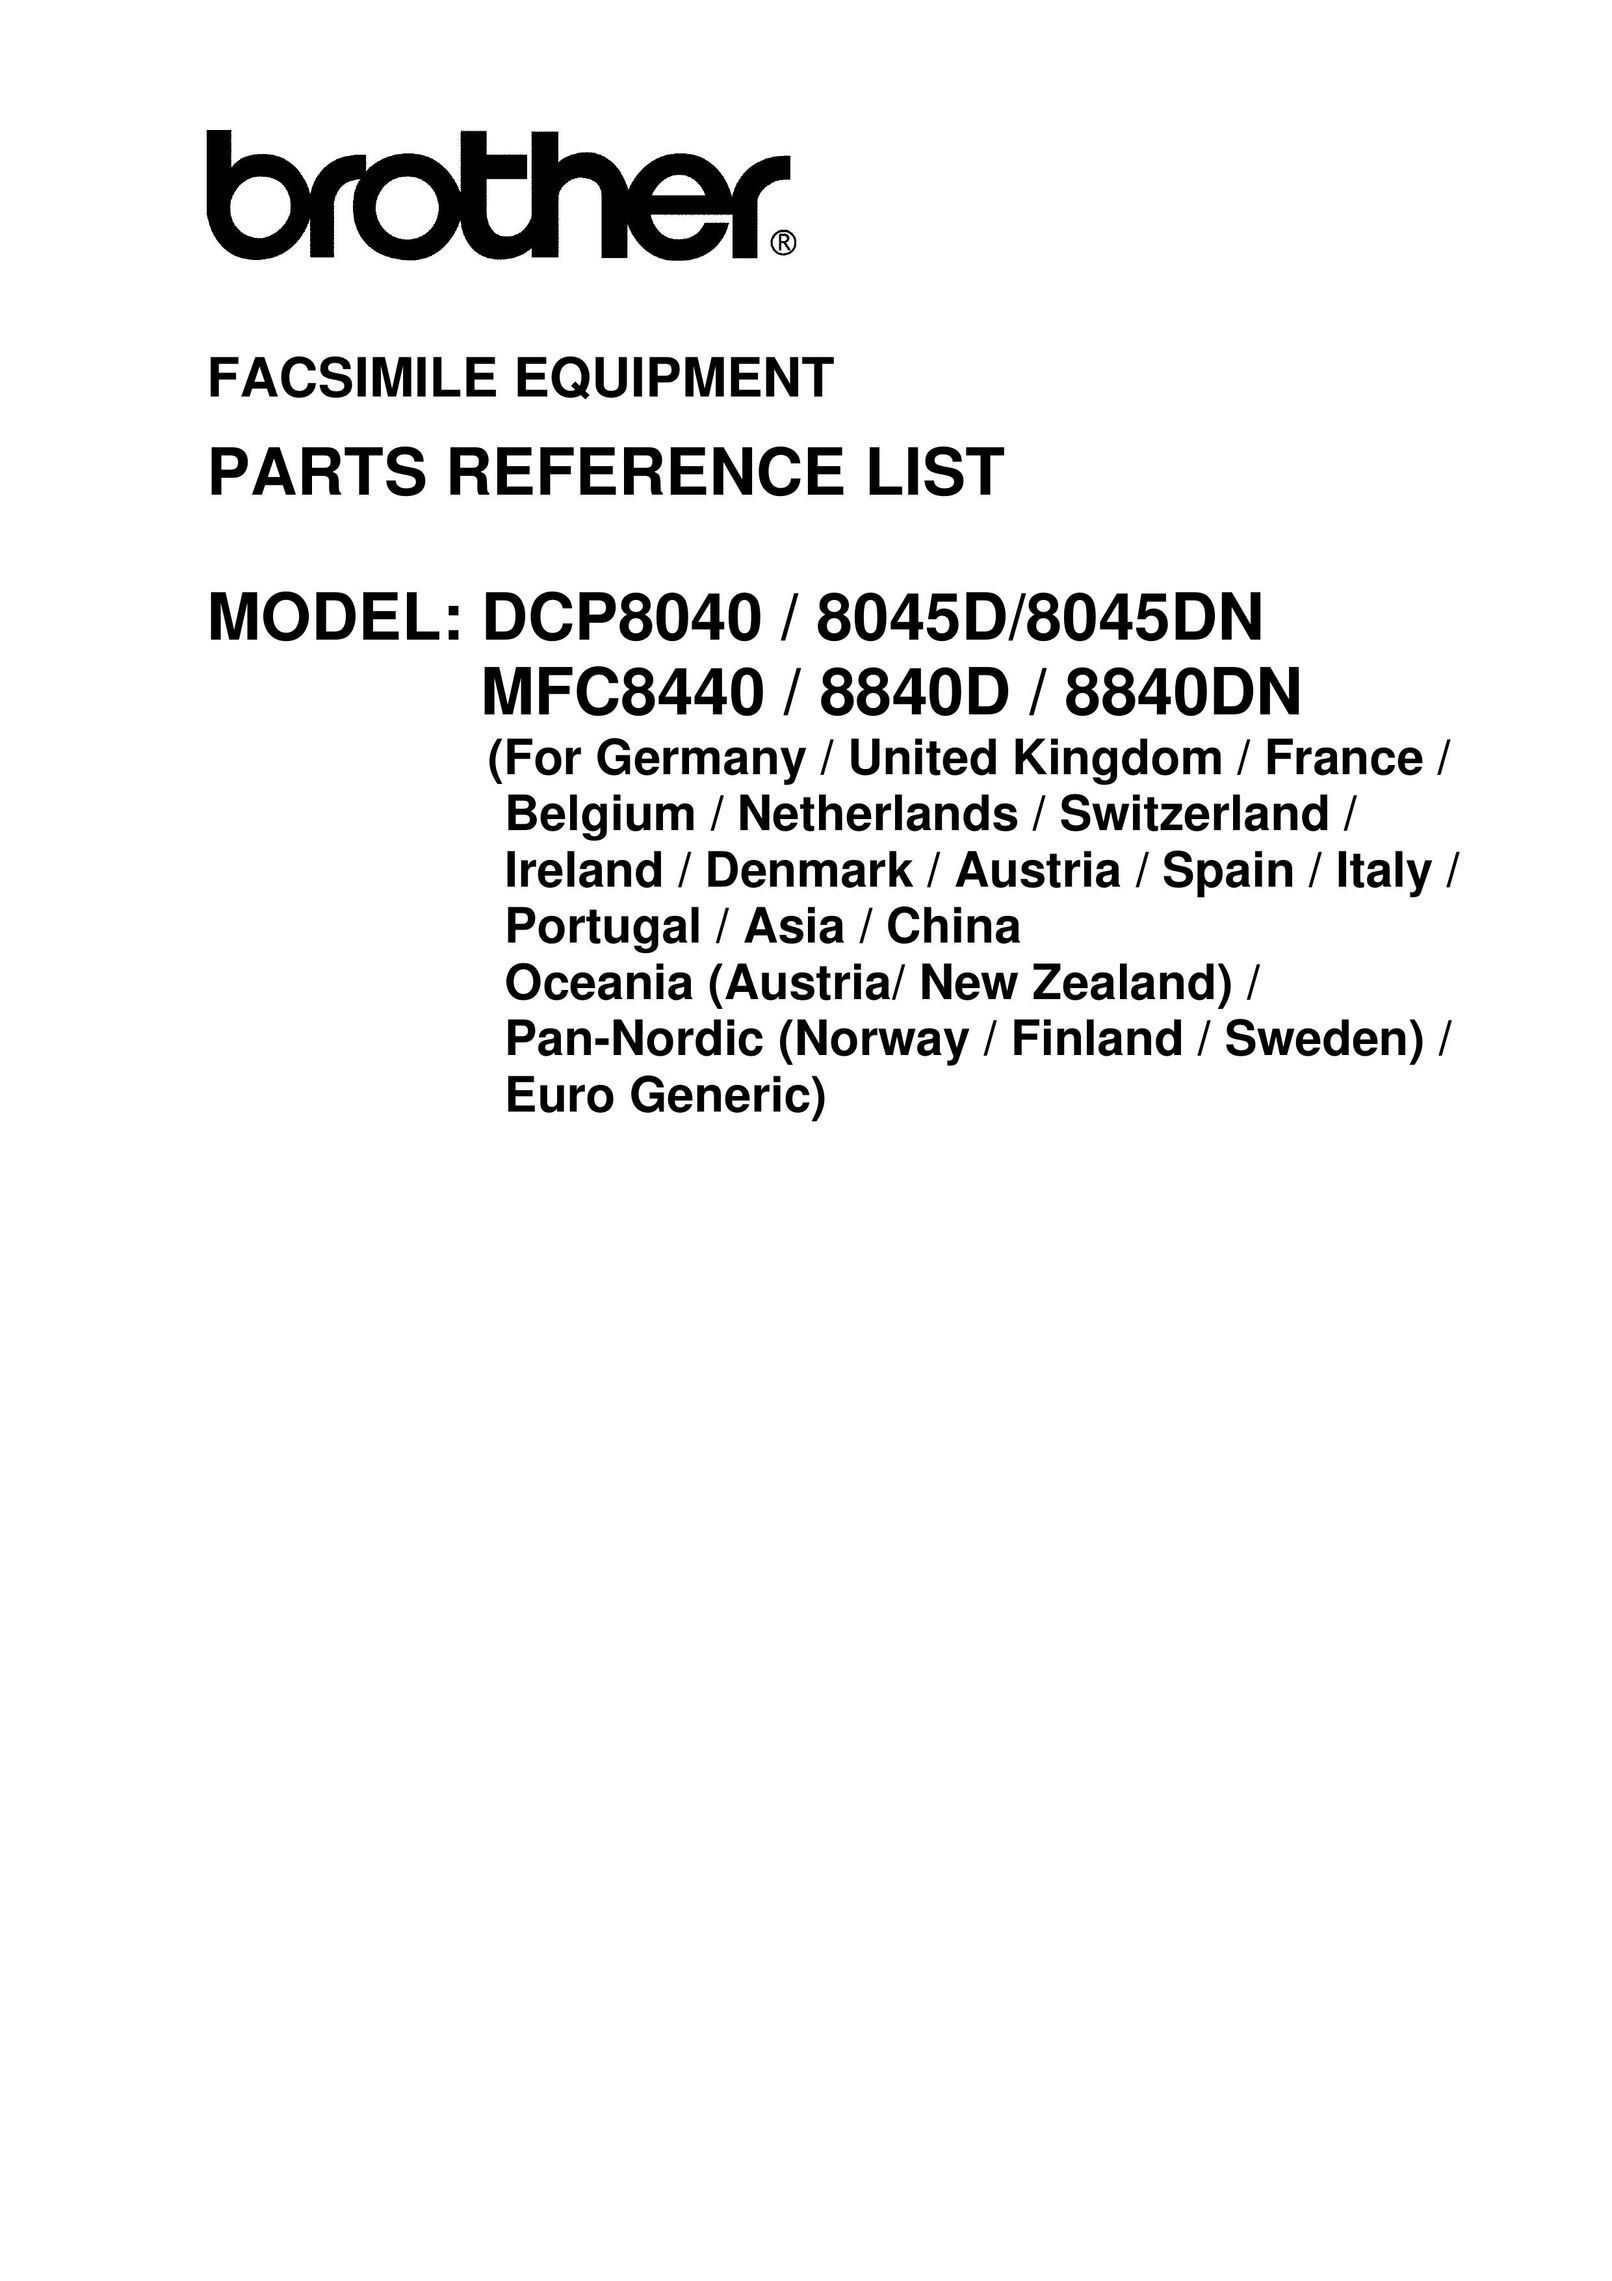 Brother DCP8040 Fax Machine User Manual